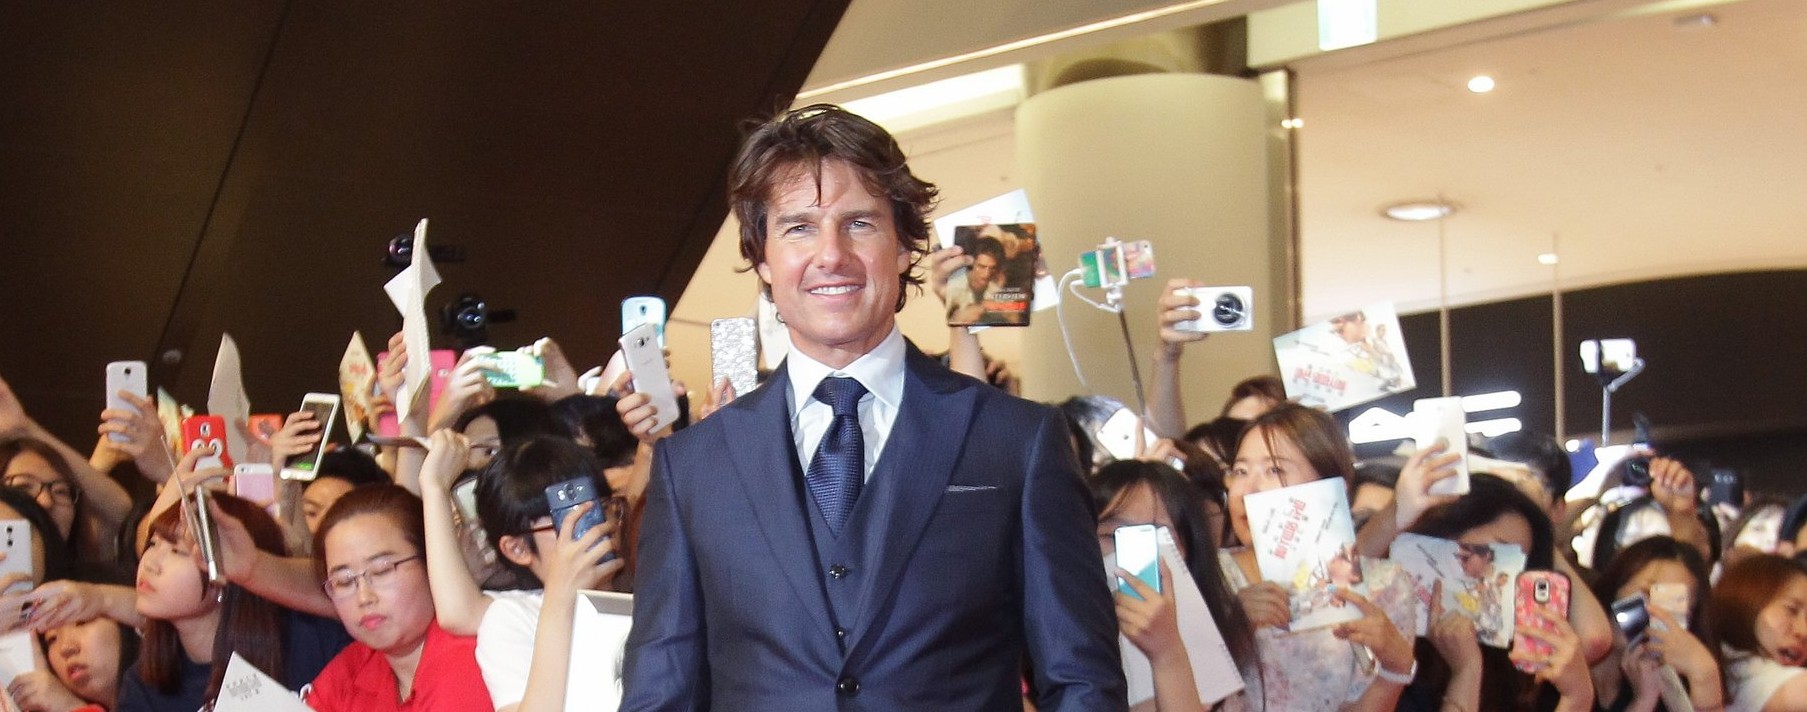 Mission: Impossible – Rogue Nation Seoul Premiere & Press Conference